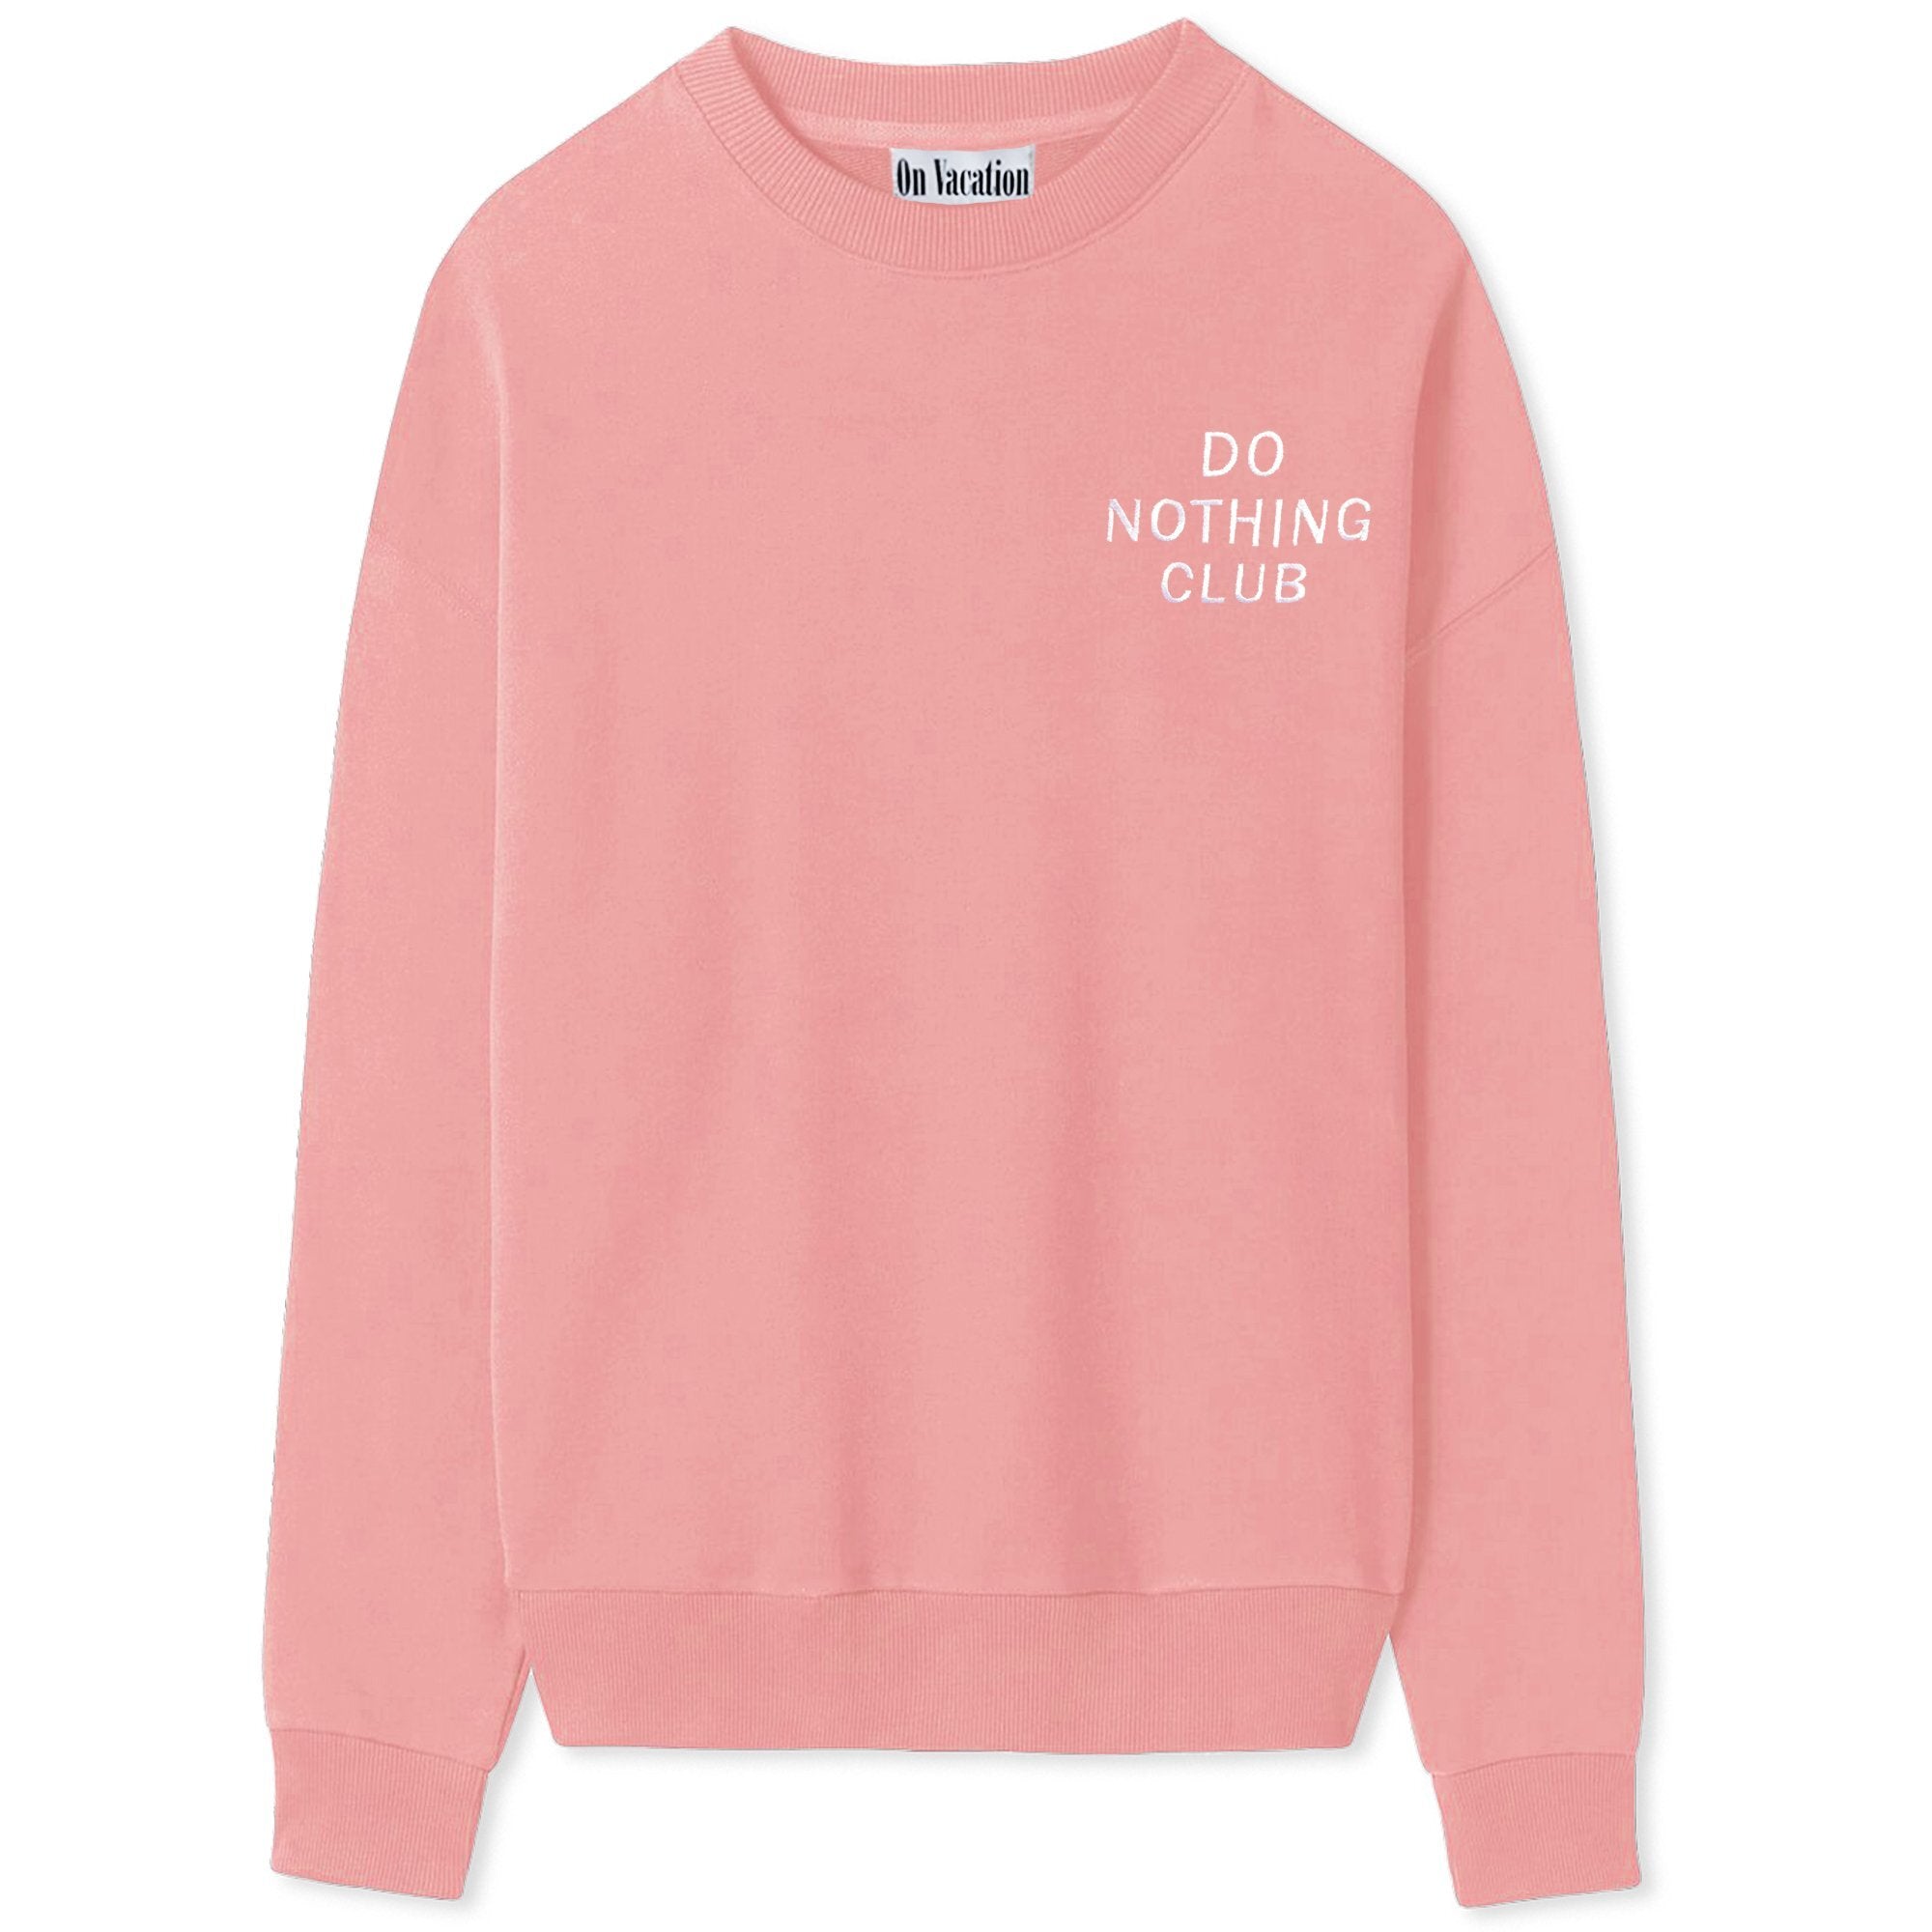 On Vacation Ladies Sweater "Do Nothing Club" - Rose